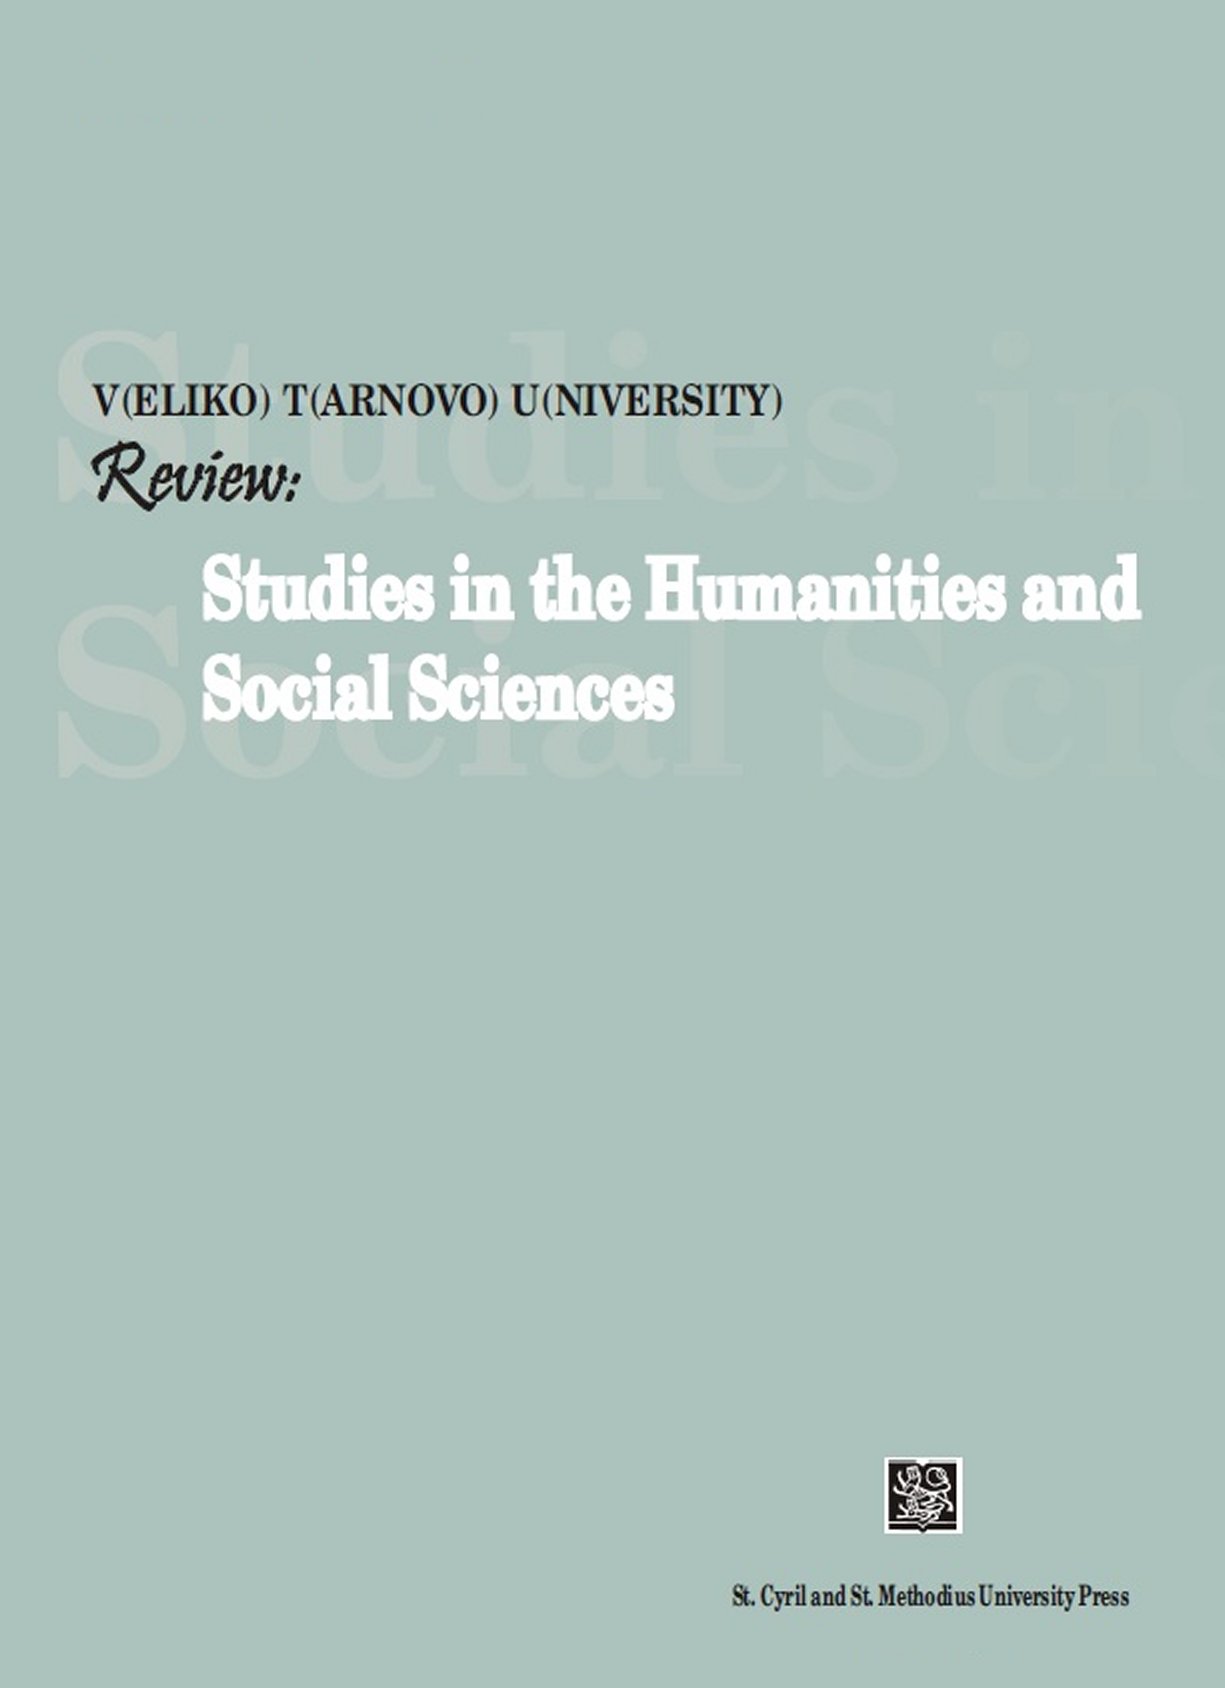 VTU Review: Studies in the Humanities and Social Sciences